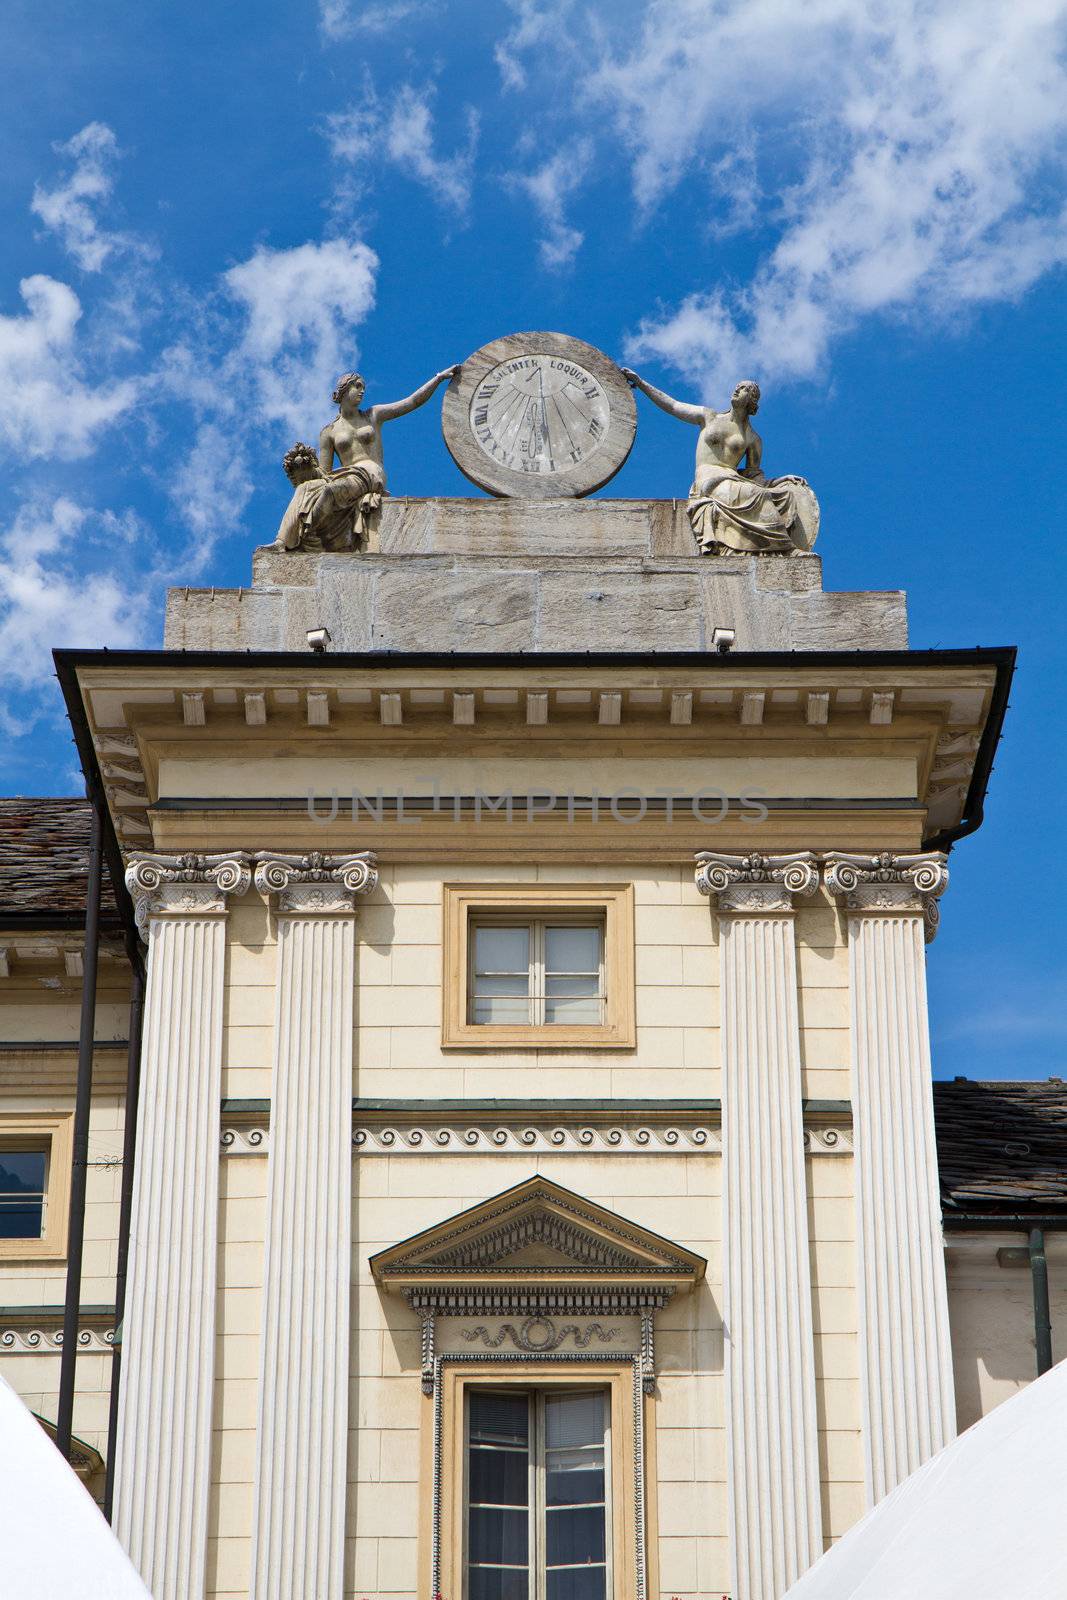 Town hall of Aosta in Italy. by lsantilli